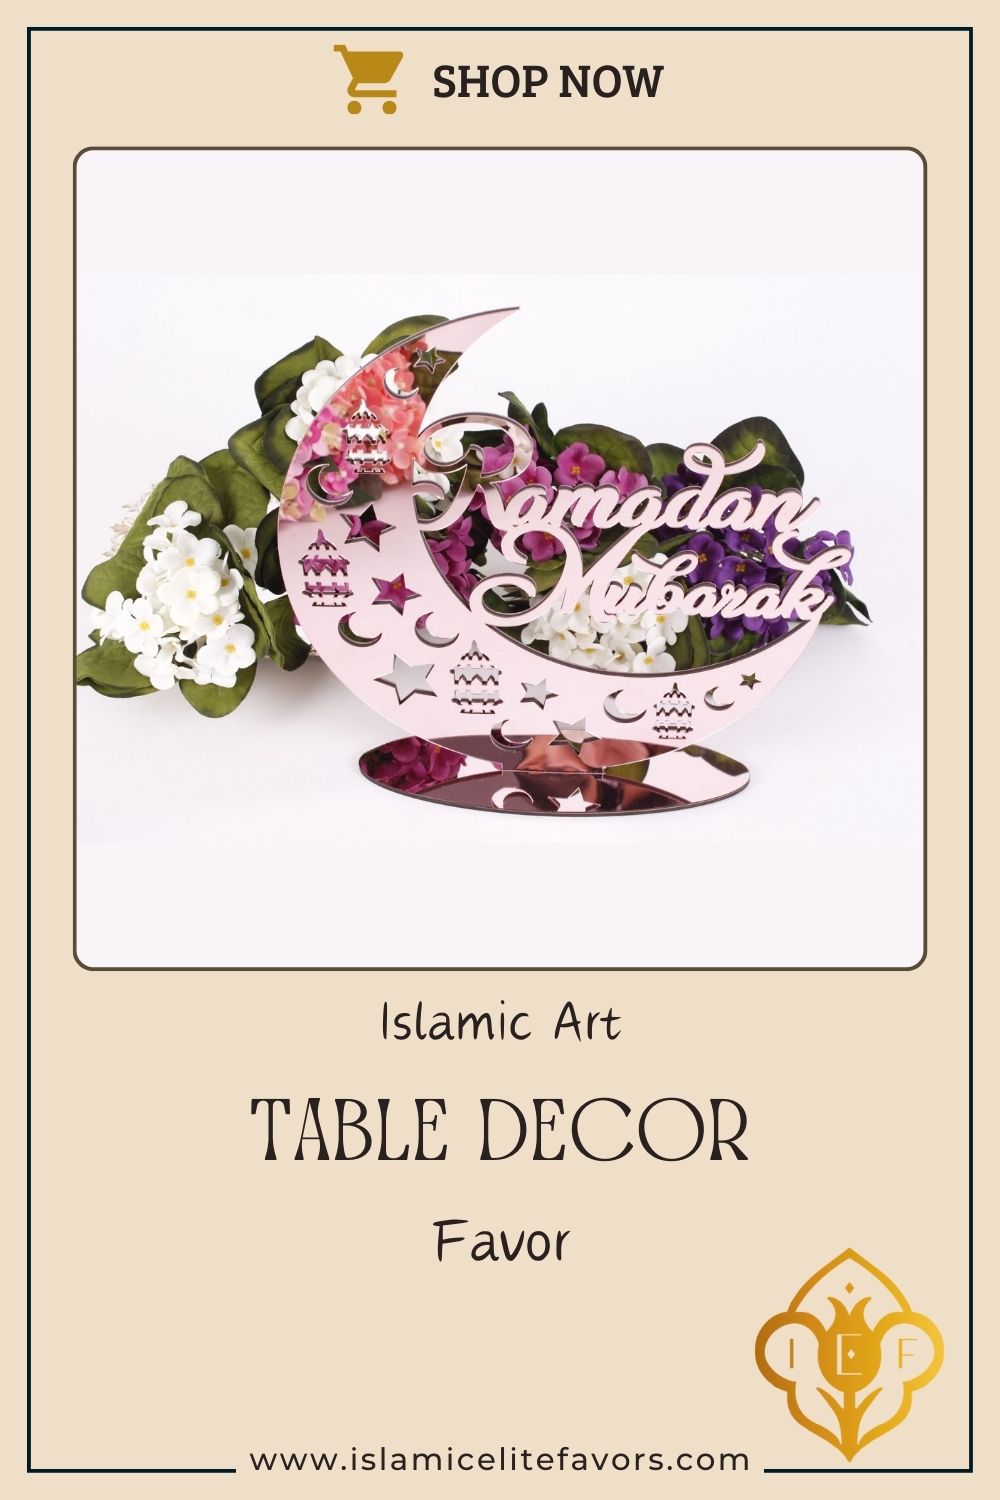 Ramadan Eid Table Décor Favors Tabletop Sign with Stand Islamic Gifts - Islamic Elite Favors is a handmade gift shop offering a wide variety of unique and personalized gifts for all occasions. Whether you're looking for the perfect Ramadan, Eid, Hajj, wedding gift or something special for a birthday, baby shower or anniversary, we have something for everyone. High quality, made with love.